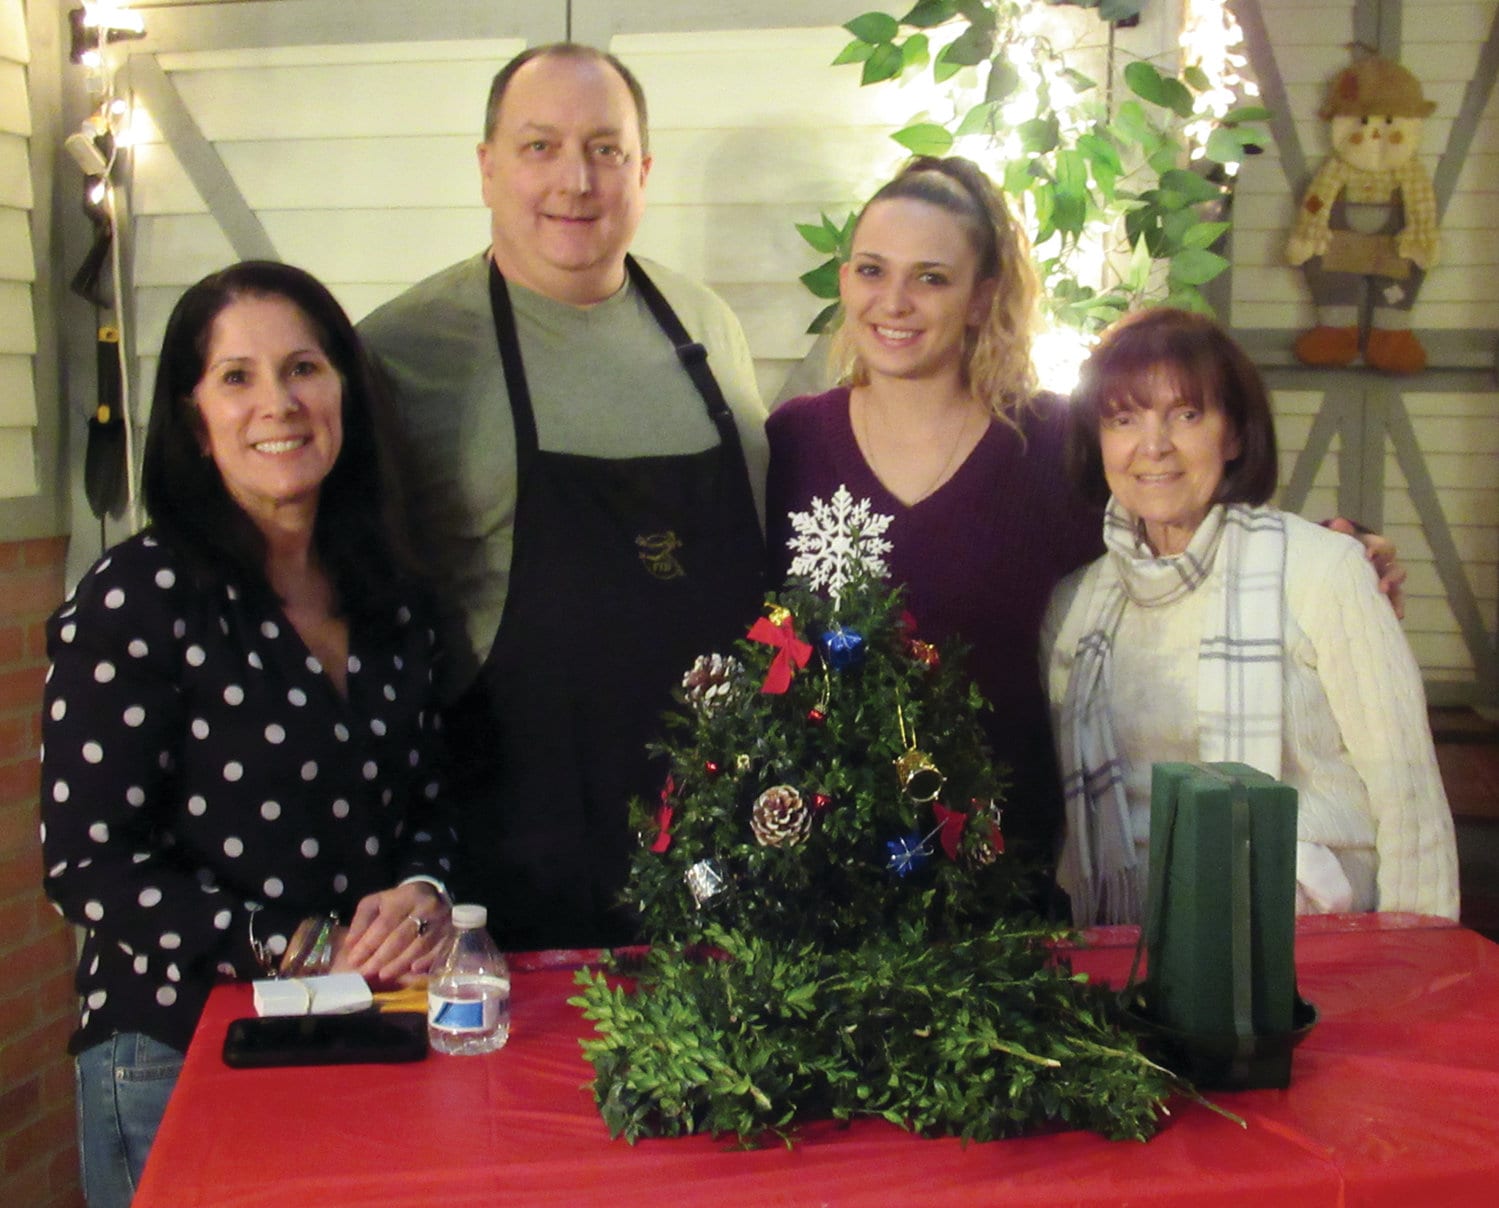 Atwood Florist, Macera’s fundraiser nets more than $1K for domestic violence